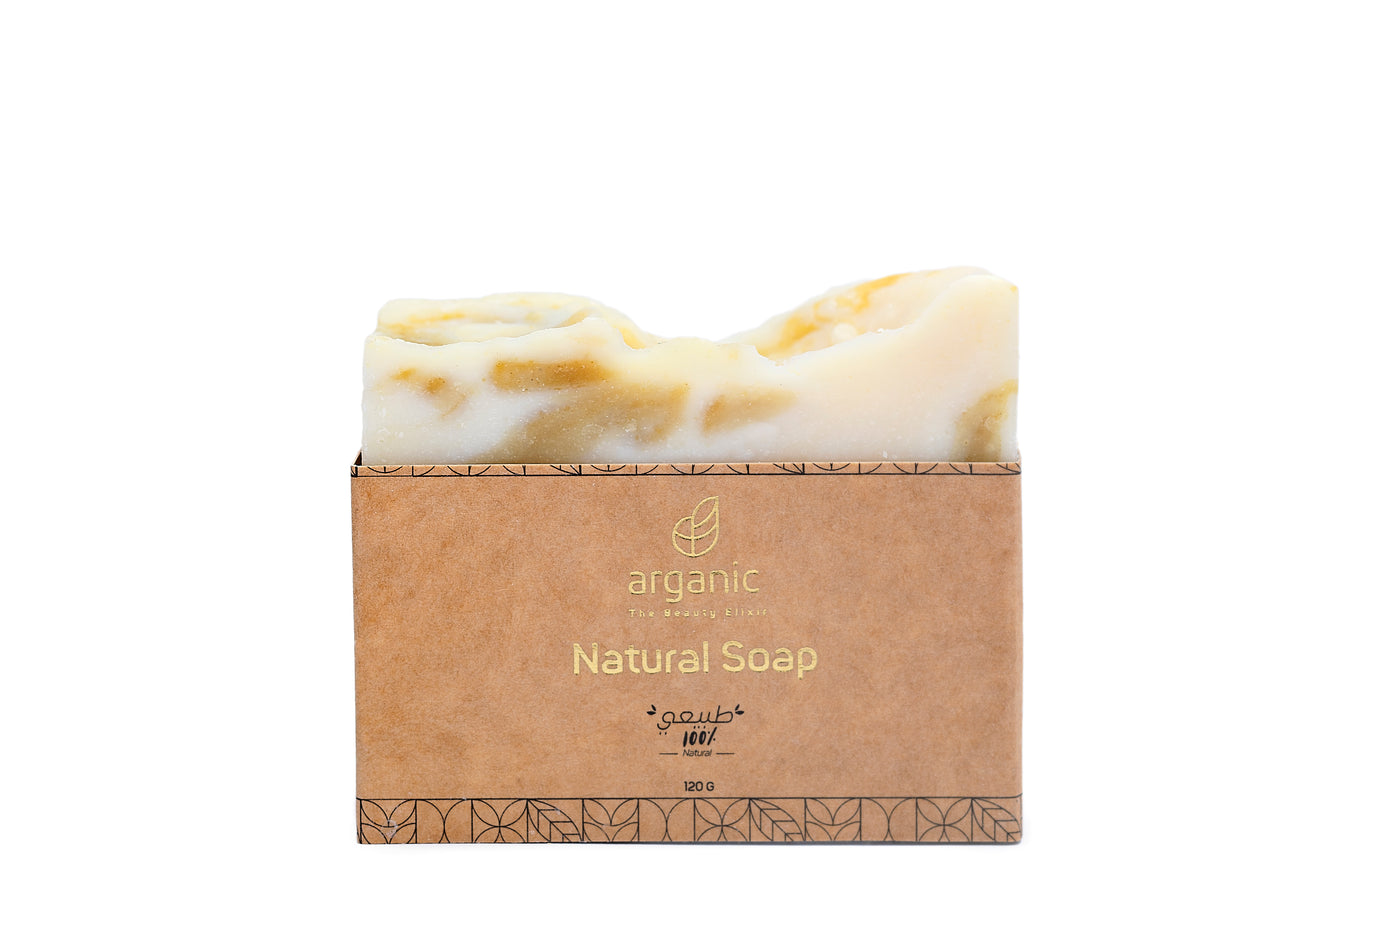 Handcrafted natural soap bar with arganic branding.